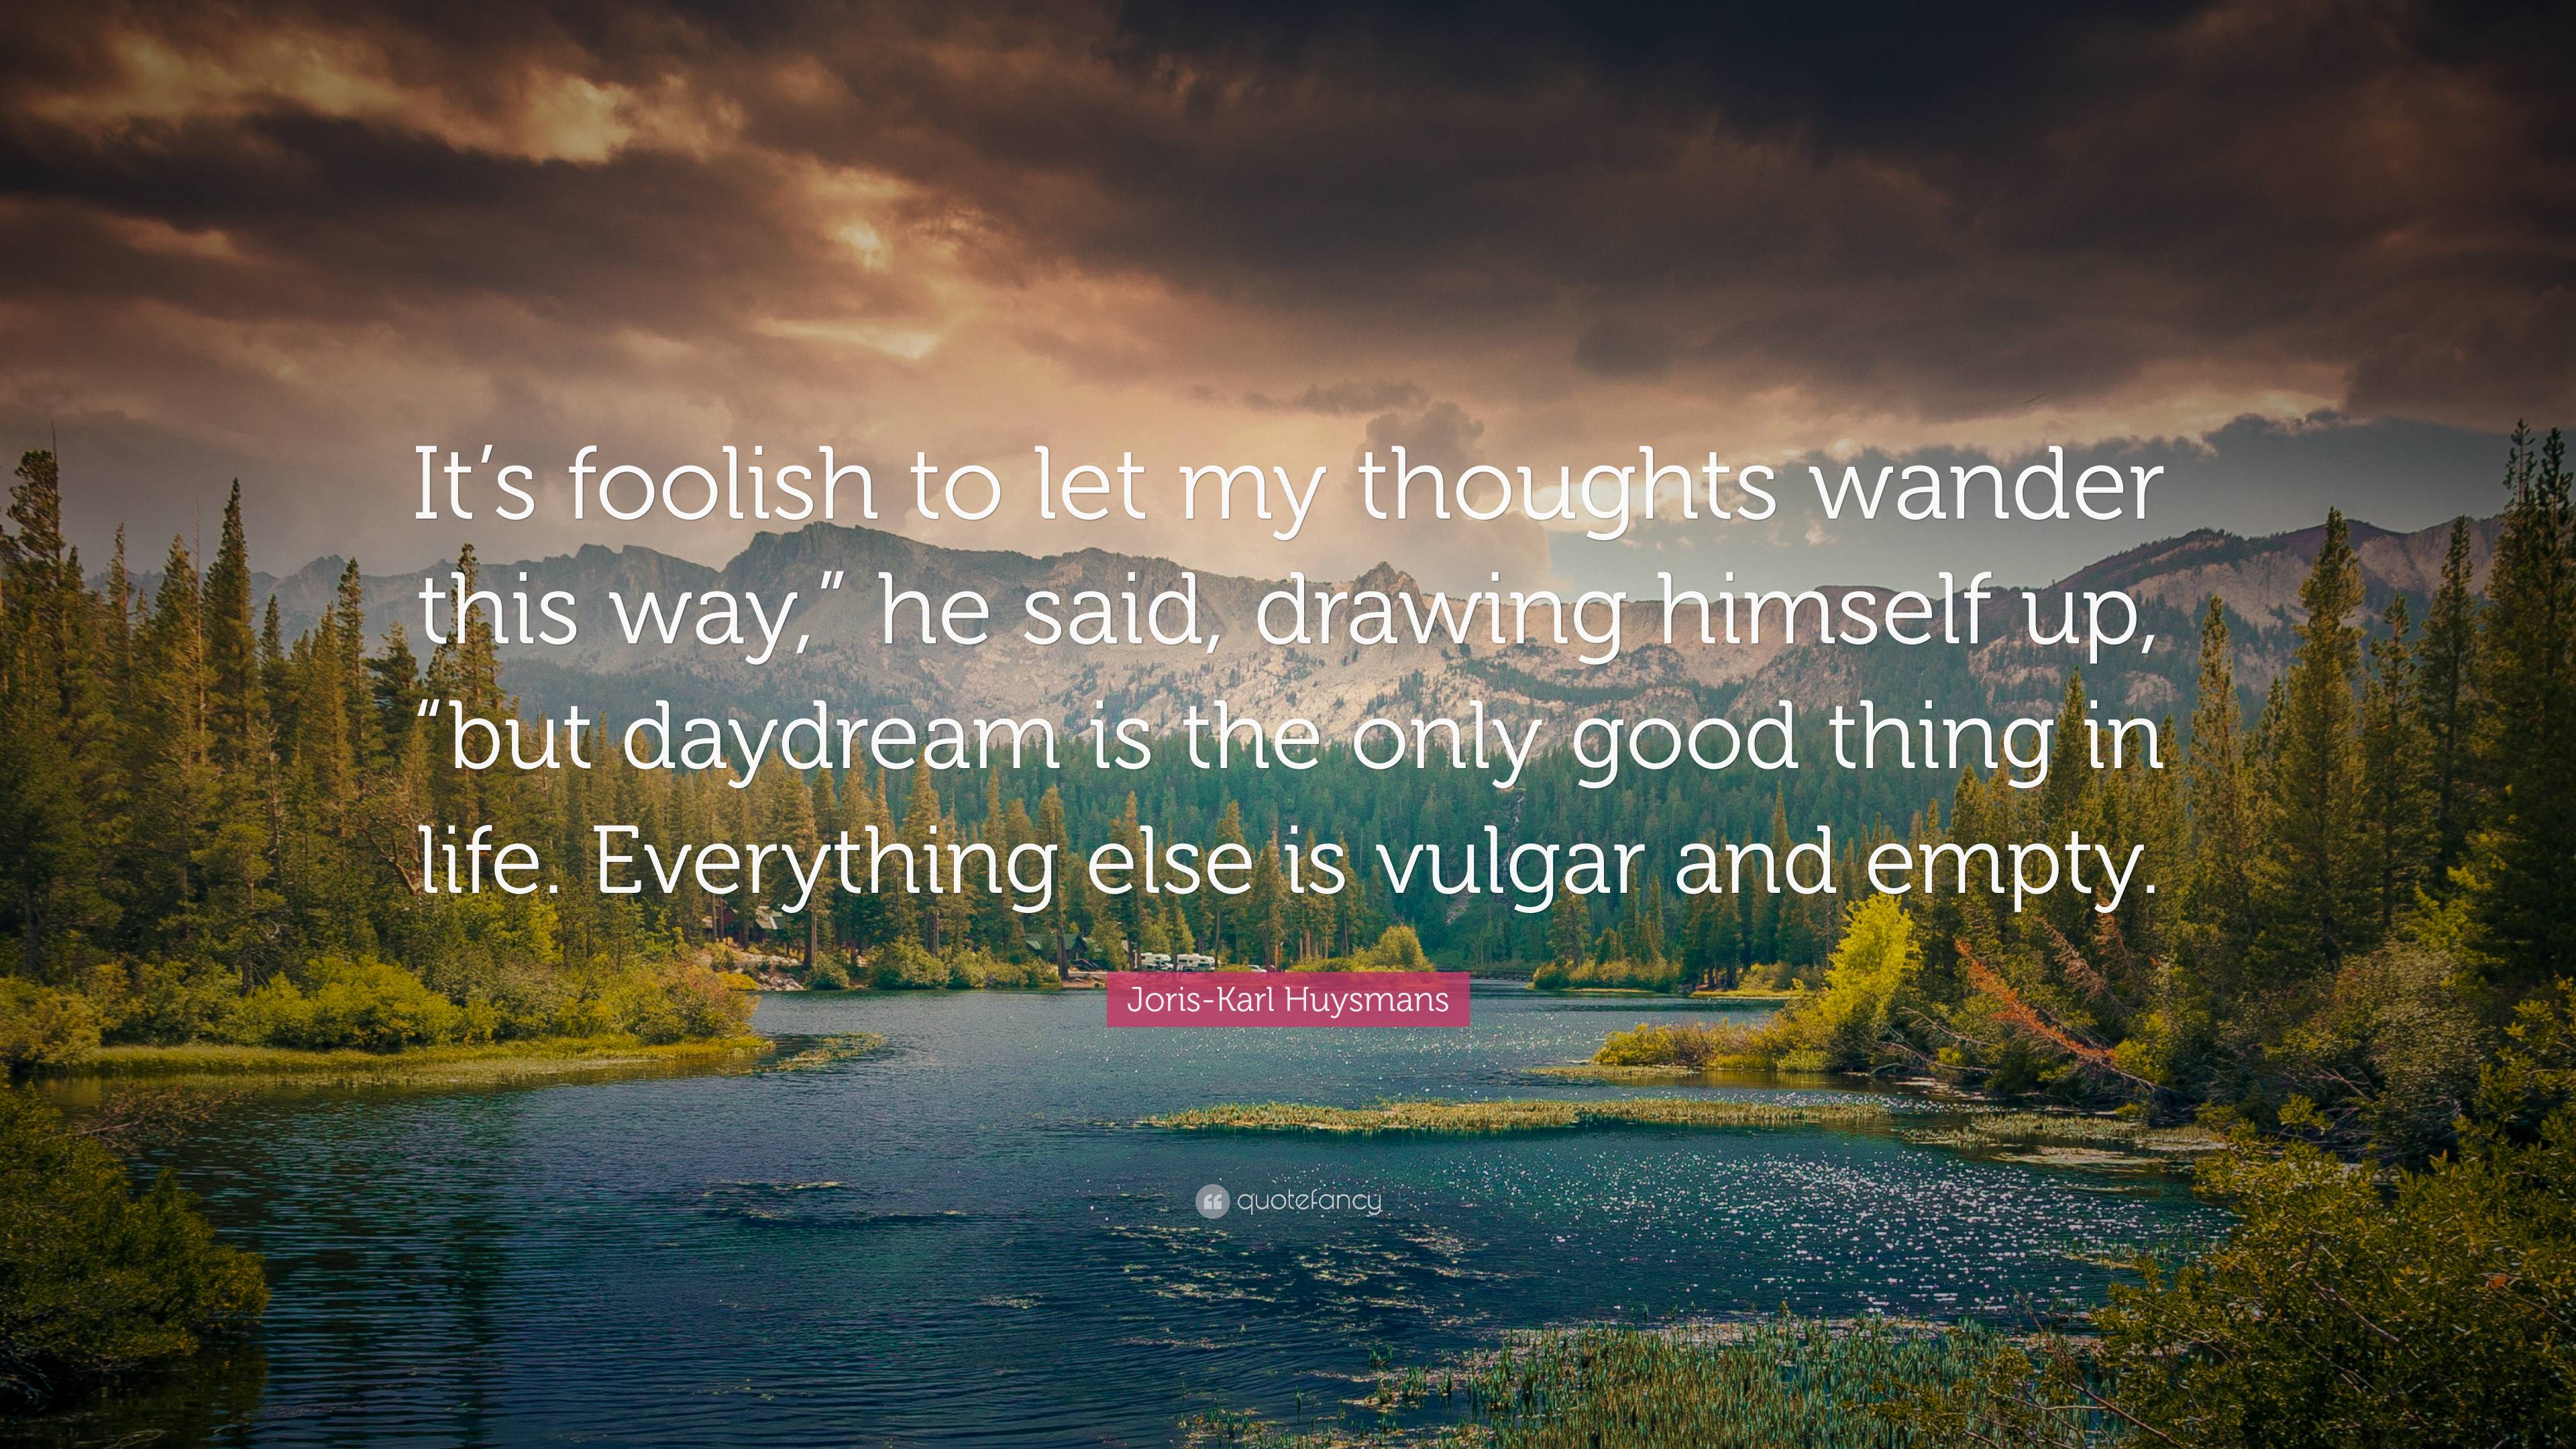 Joris-Karl Huysmans Quote: “It’s foolish to let my thoughts wander this ...